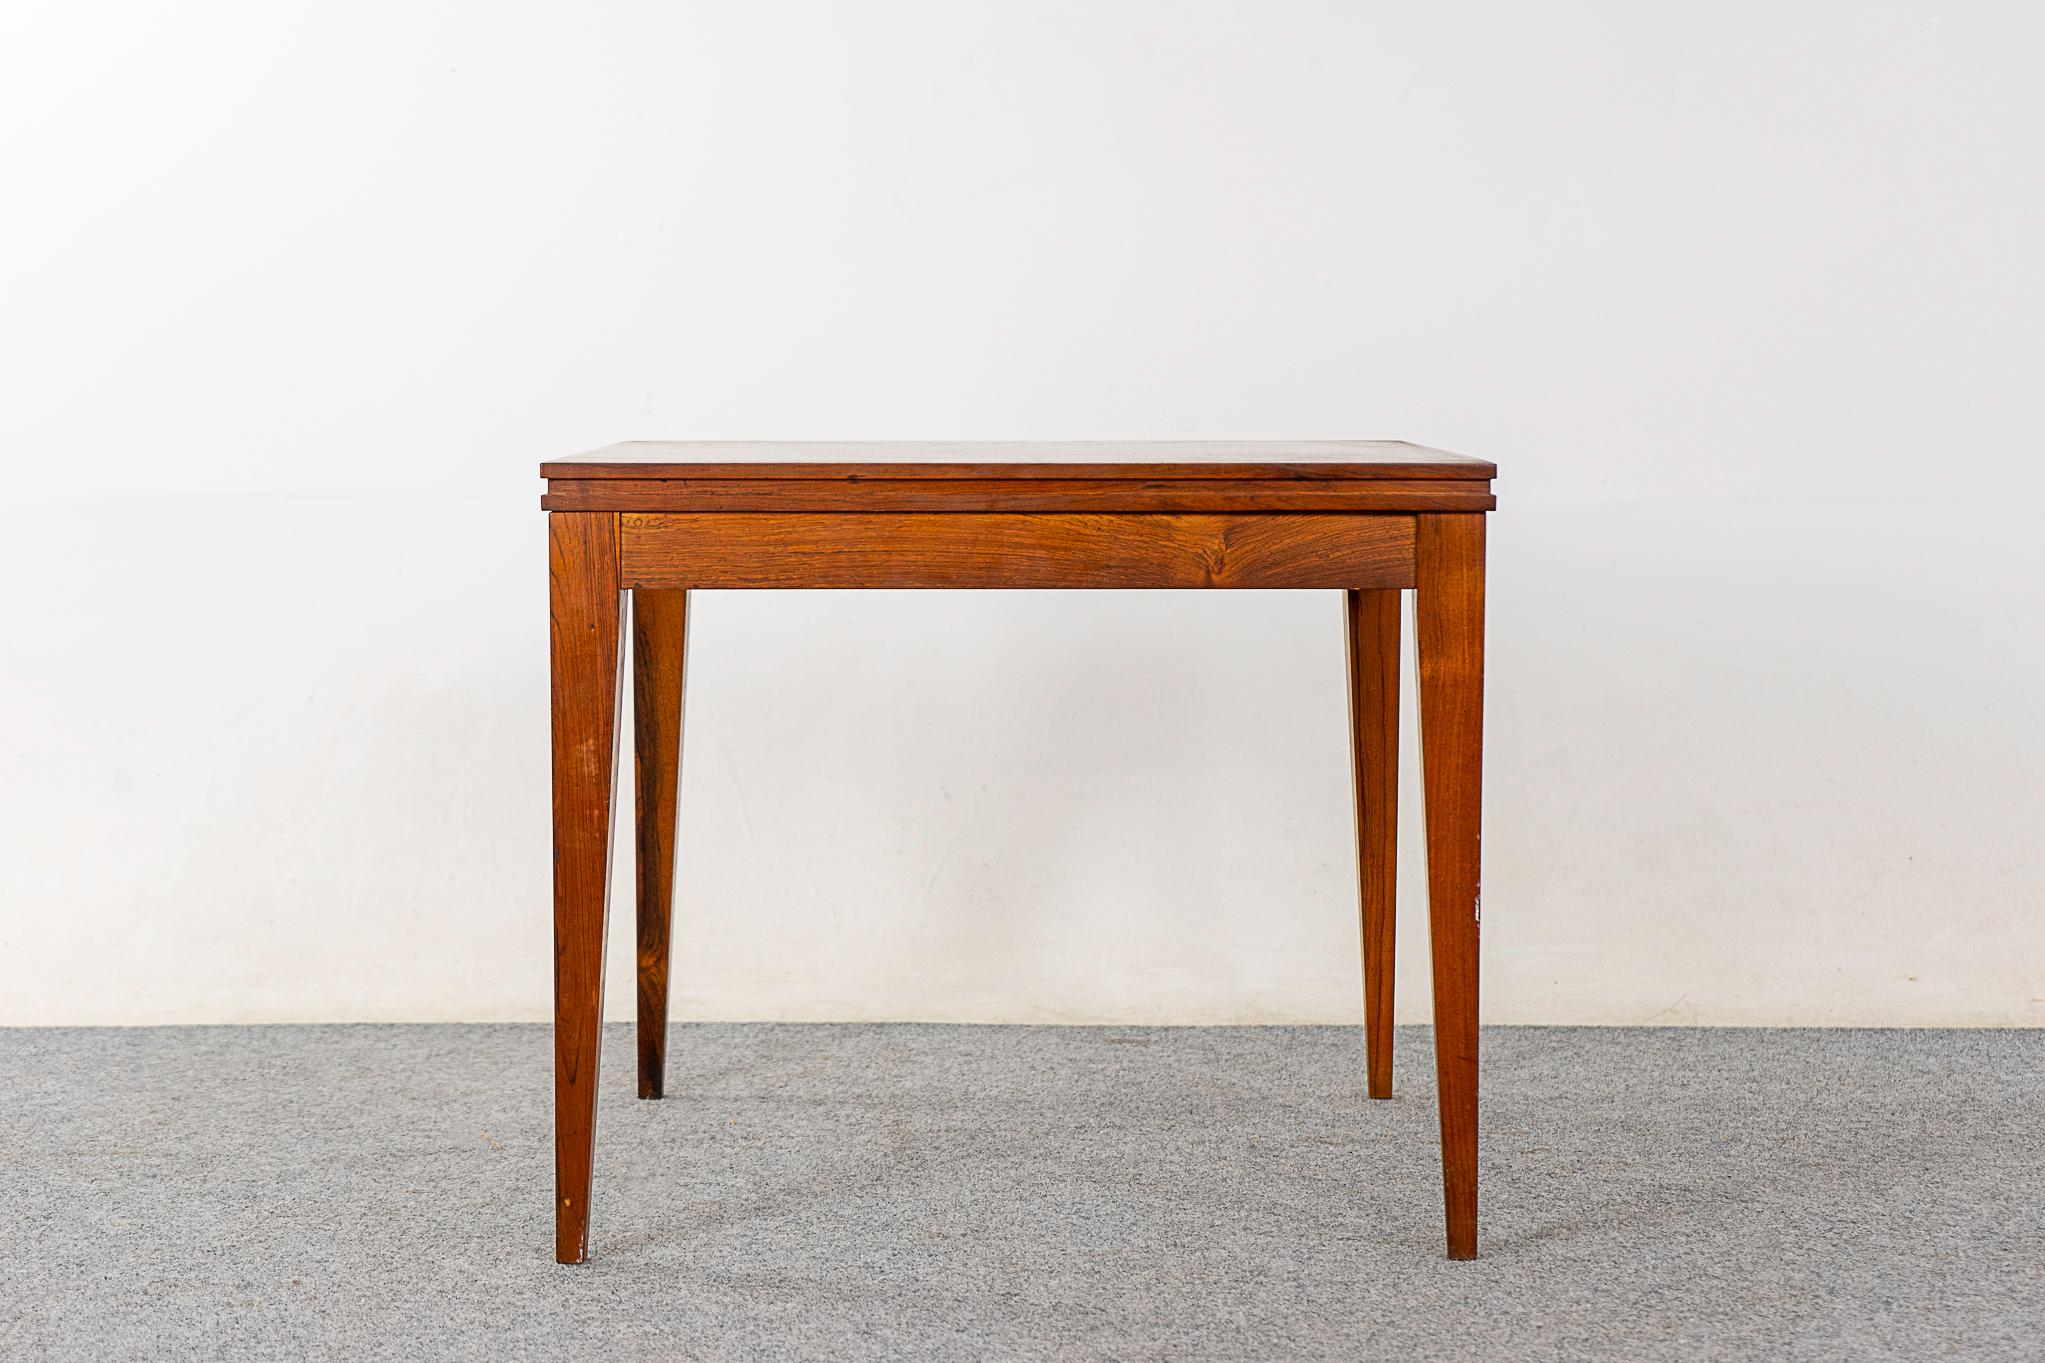 Rosewood mid-century side table, circa 1960's. Compact, highly functional table with slender tapering legs. Pairs perfectly with large sofas!  

Unrestored item, some marks consistent with age.